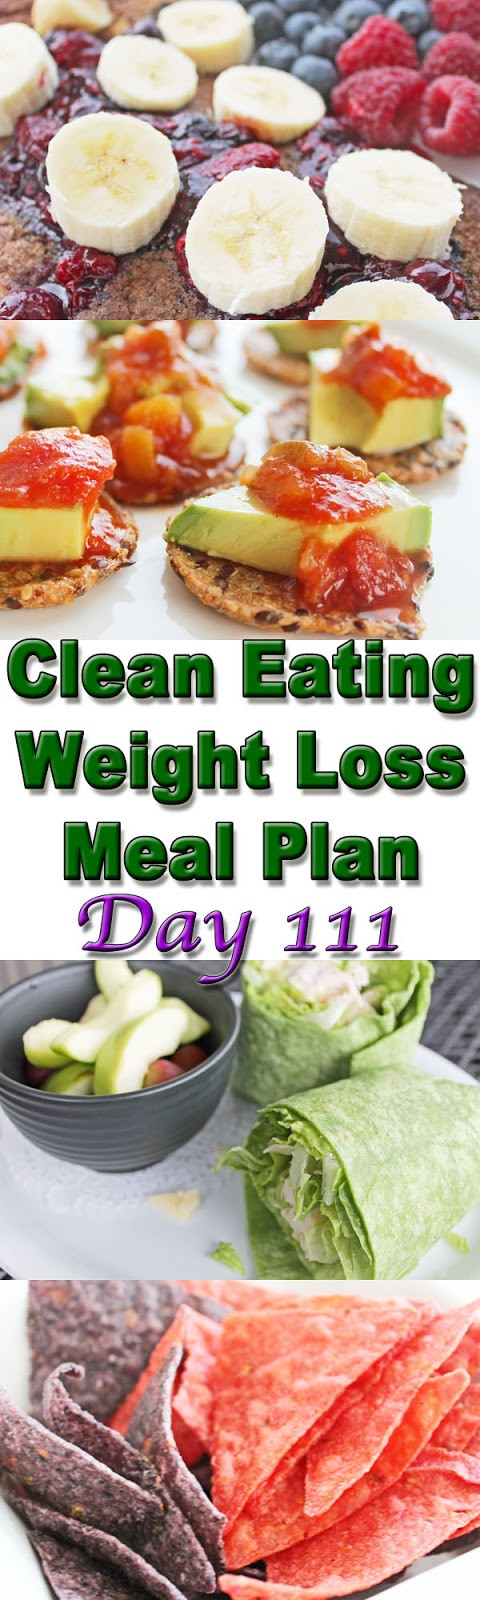 Clean Eating Weight Loss Plan
 Clean Eating Weight Loss Meal Plan 111